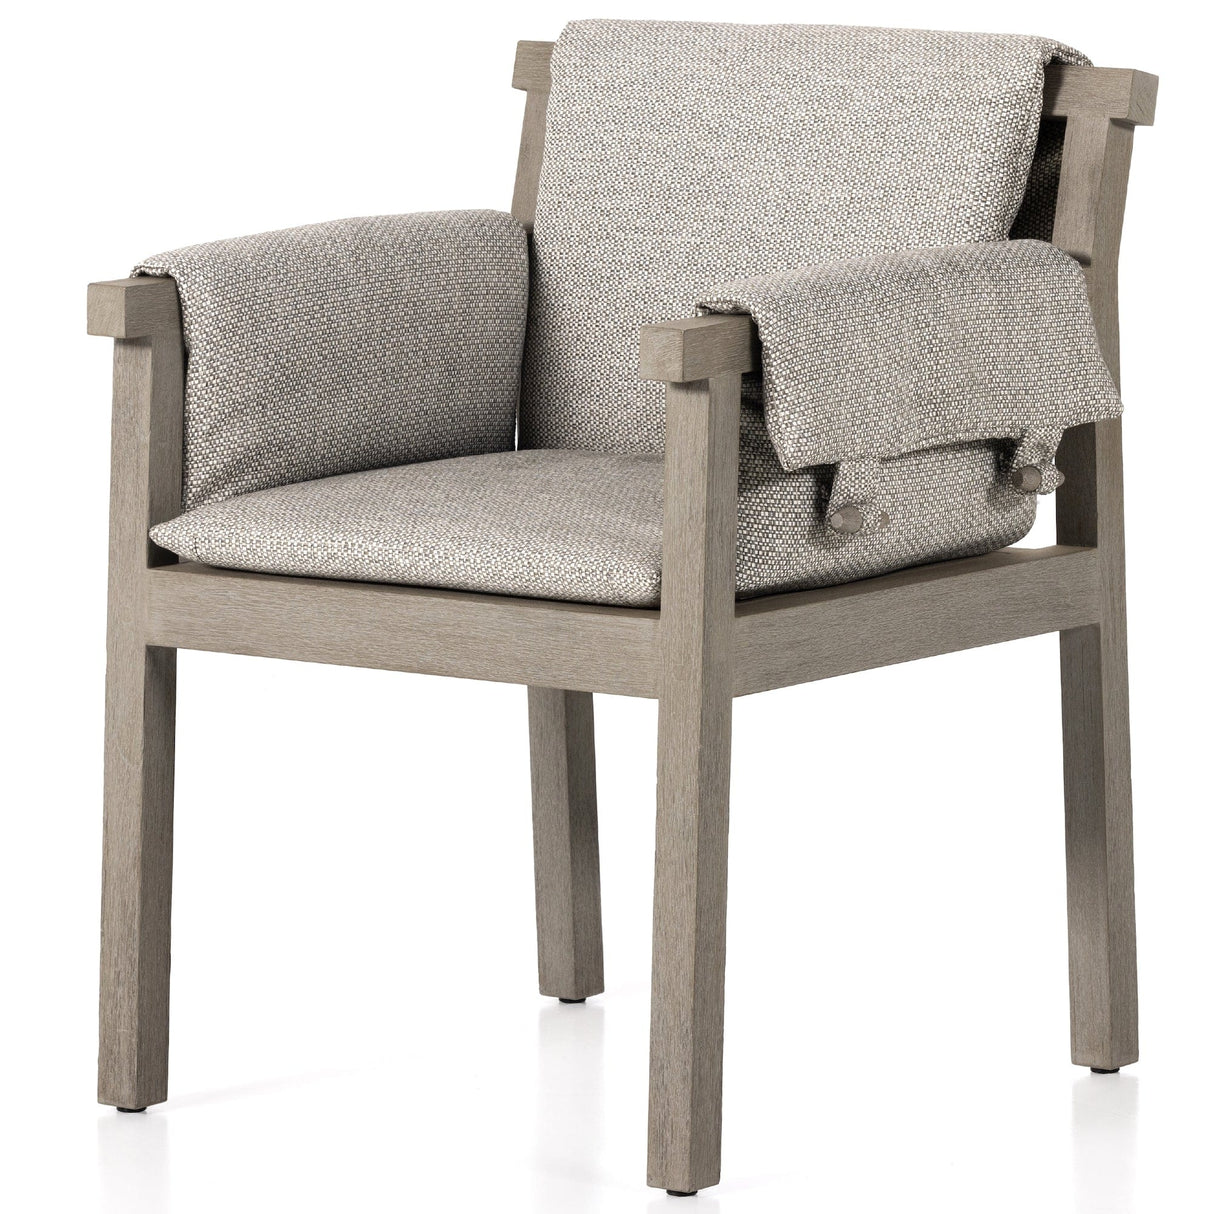 Four Hands Galway Outdoor Dining Chair Furniture